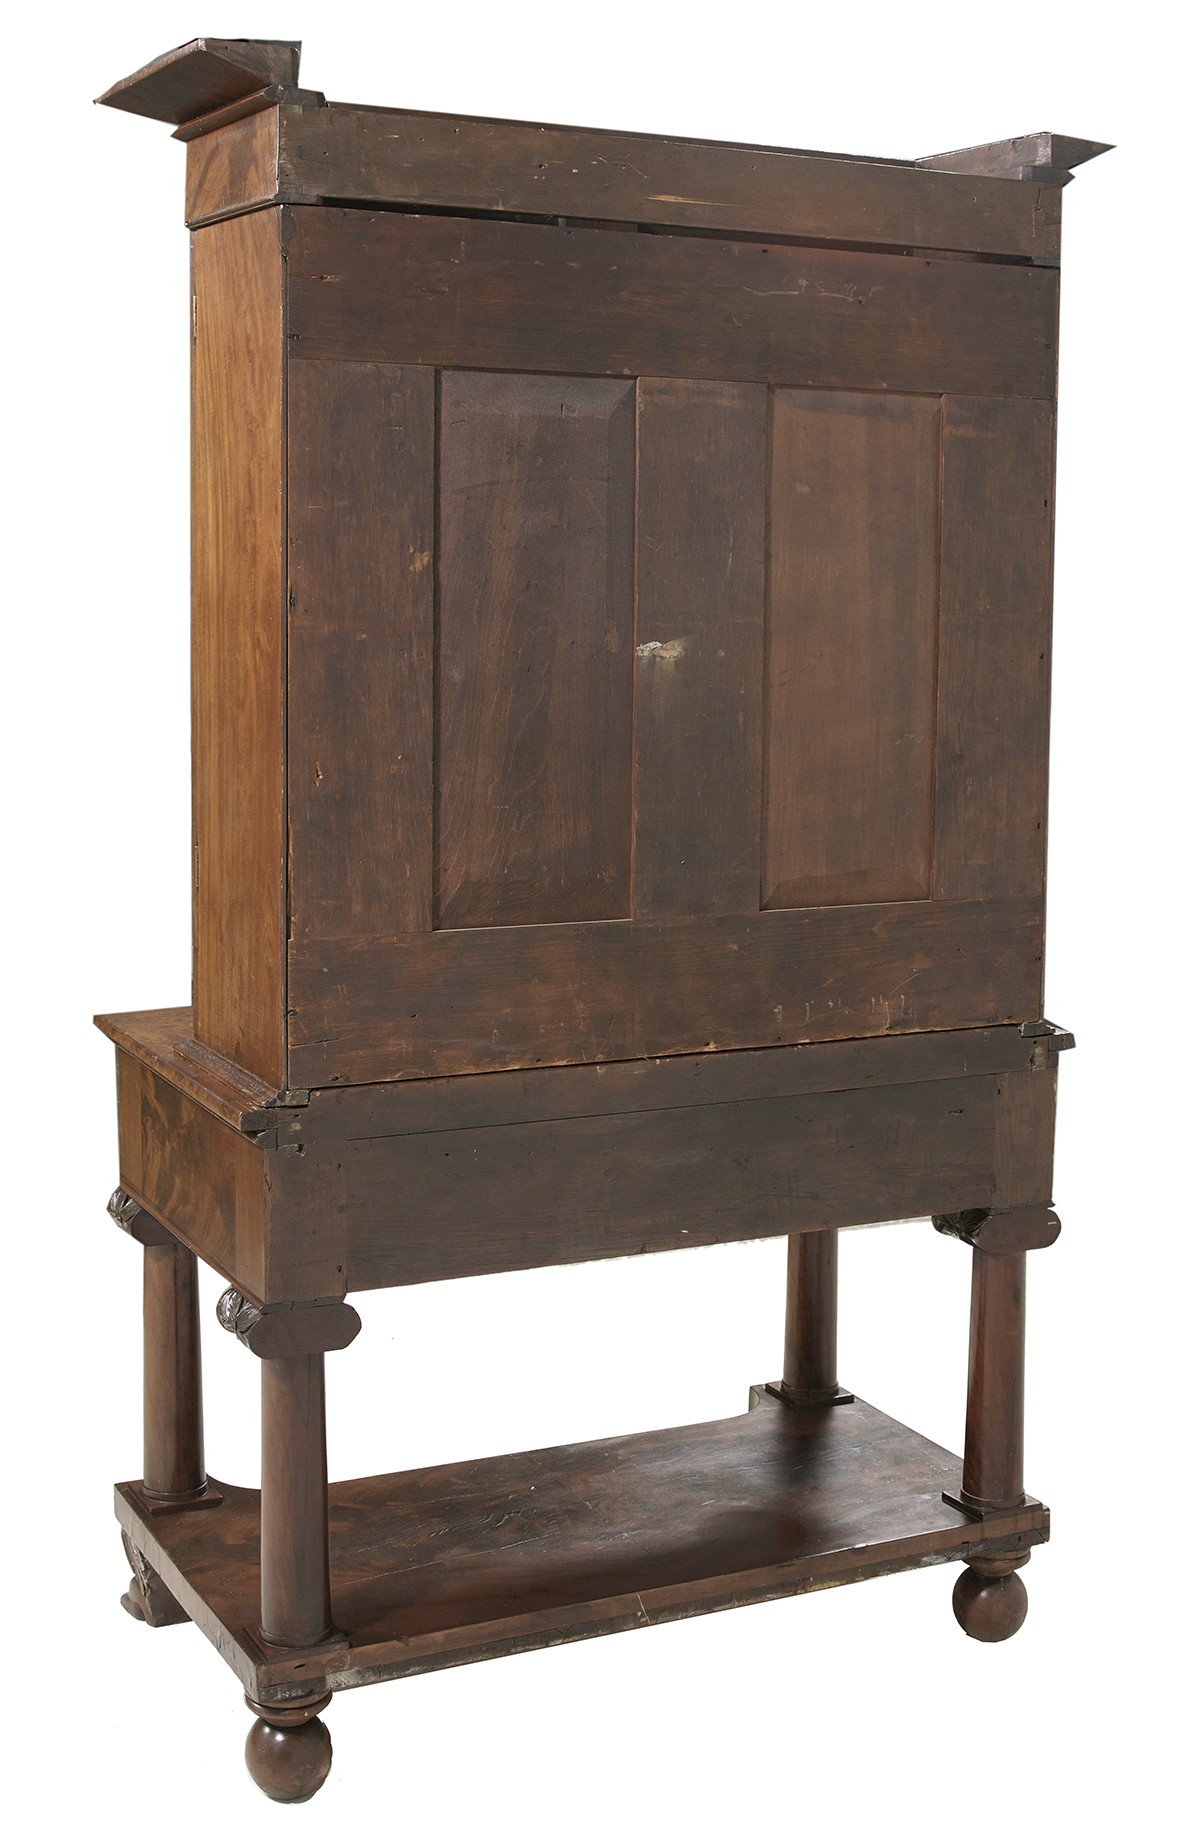 American Classical Mahogany Bookcase with Stand - Image 3 of 3